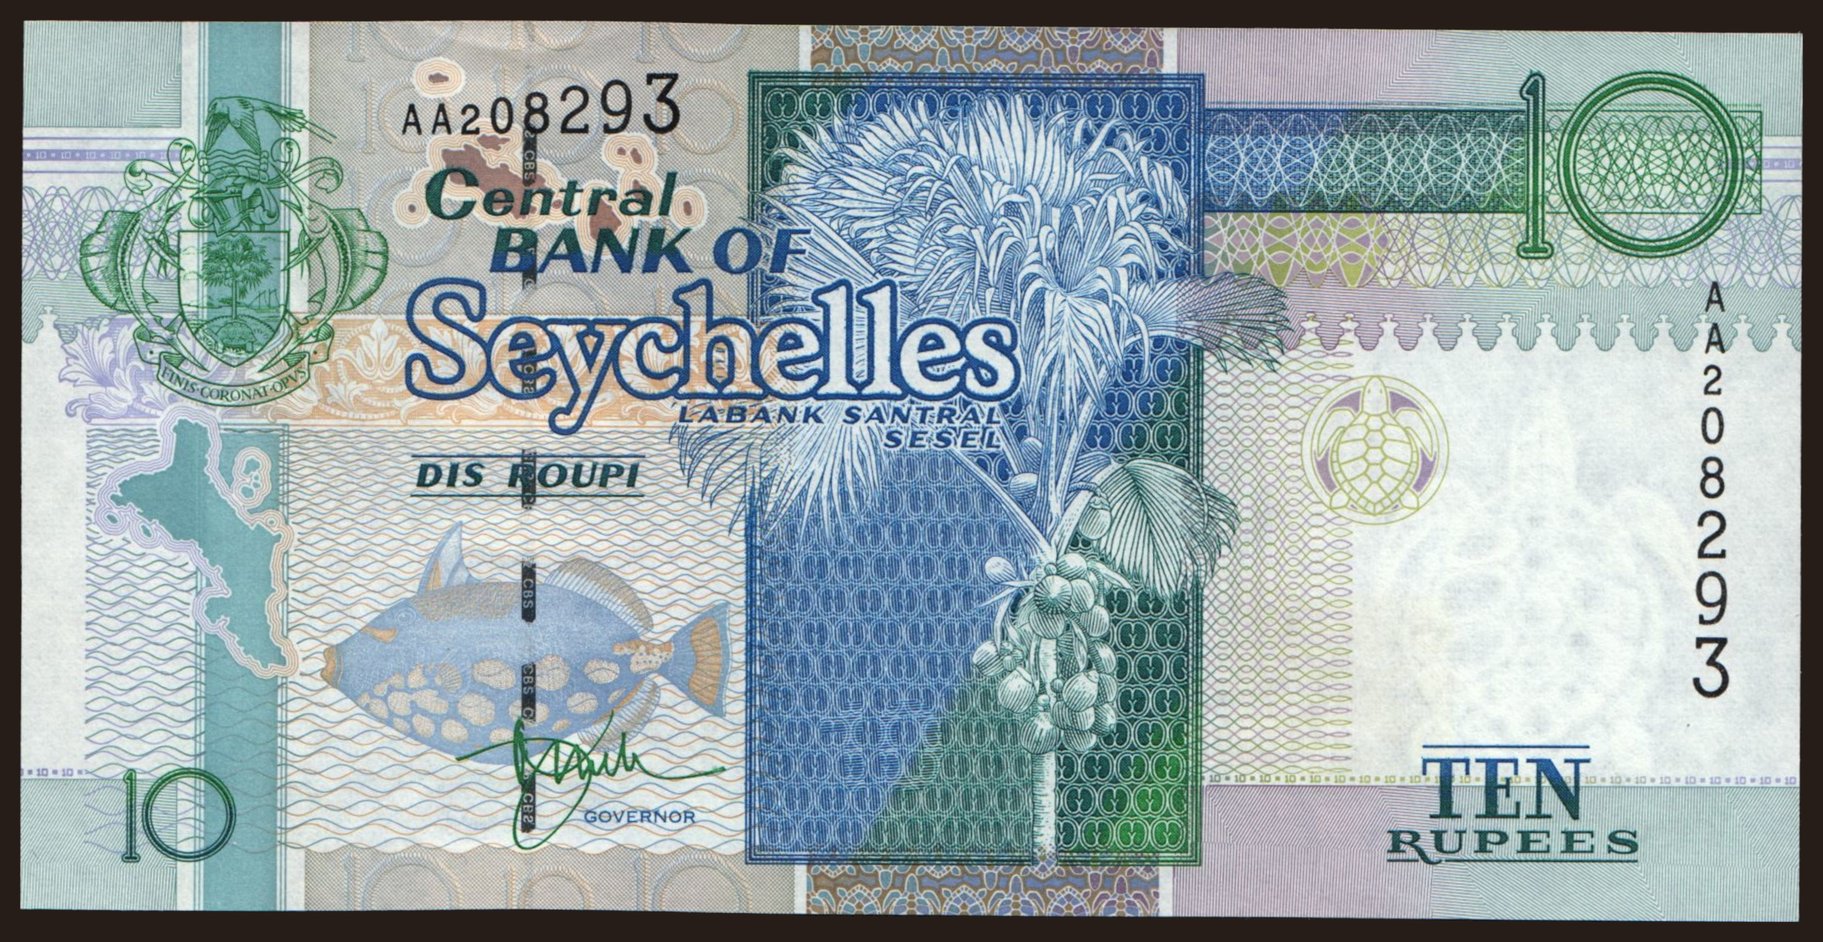 10 rupees, 1998